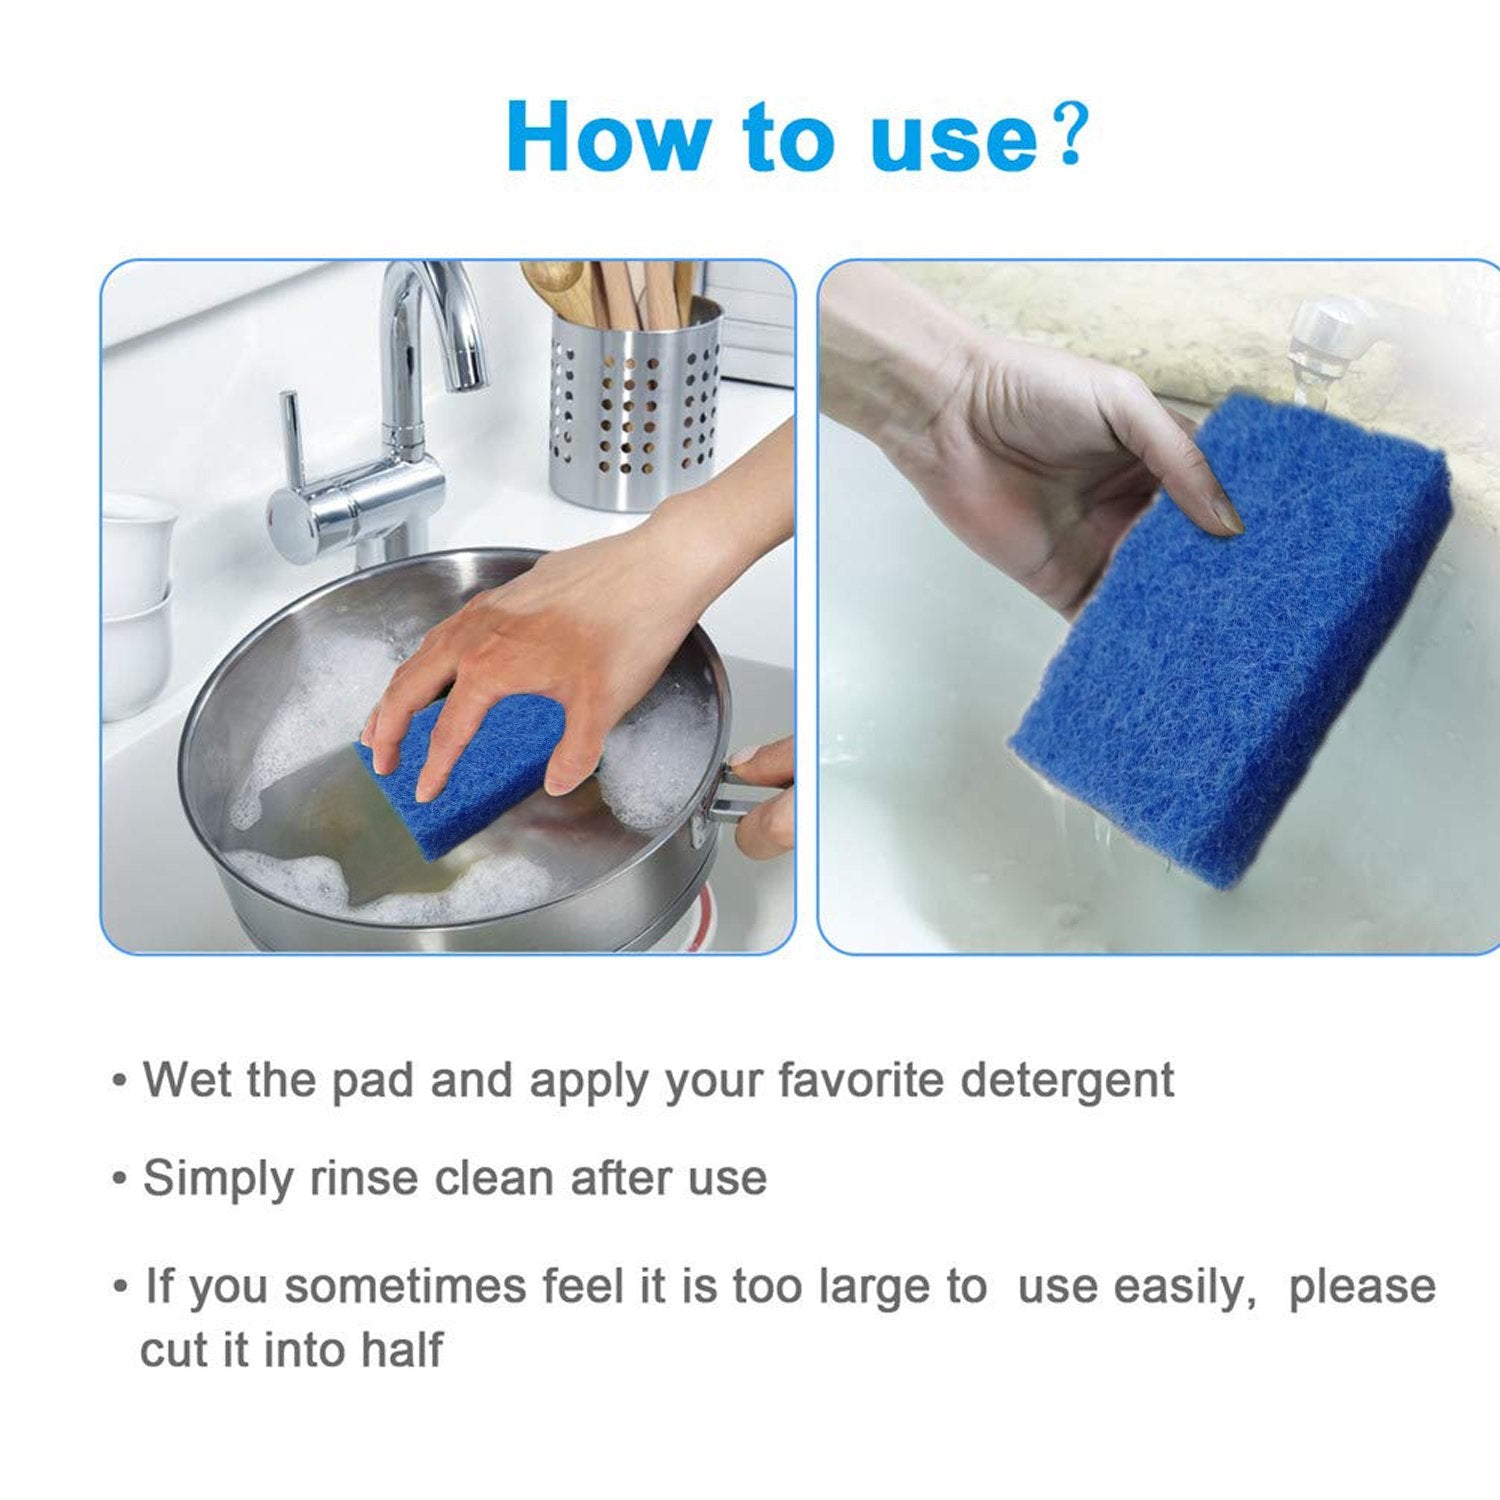 1494 Kitchen Scrubber Pads for Utensils/Tiles Cleaning (Pack of 4) - SkyShoppy